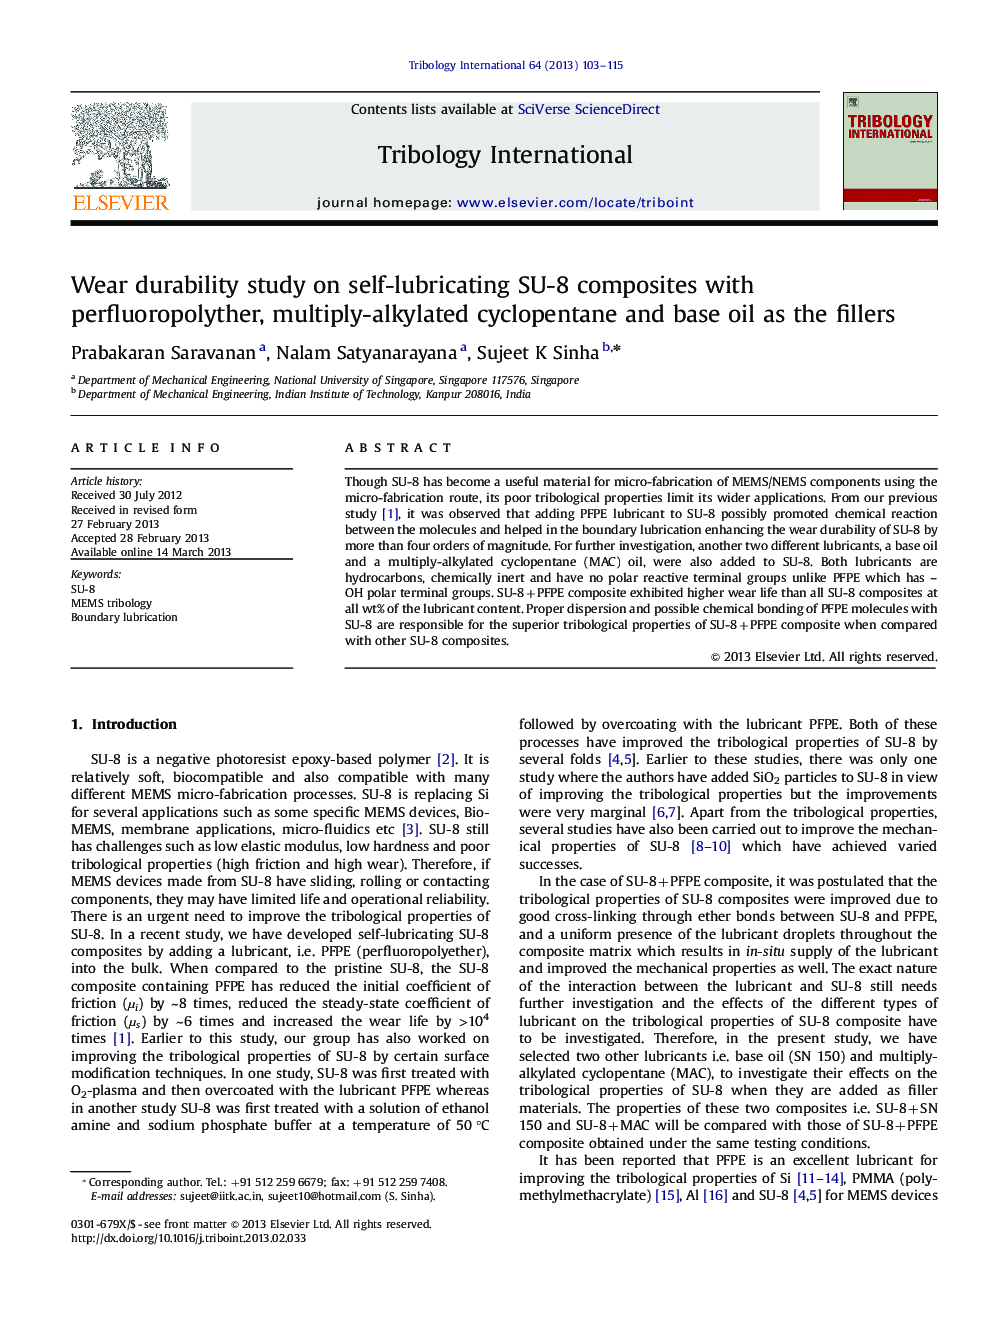 Wear durability study on self-lubricating SU-8 composites with perfluoropolyther, multiply-alkylated cyclopentane and base oil as the fillers